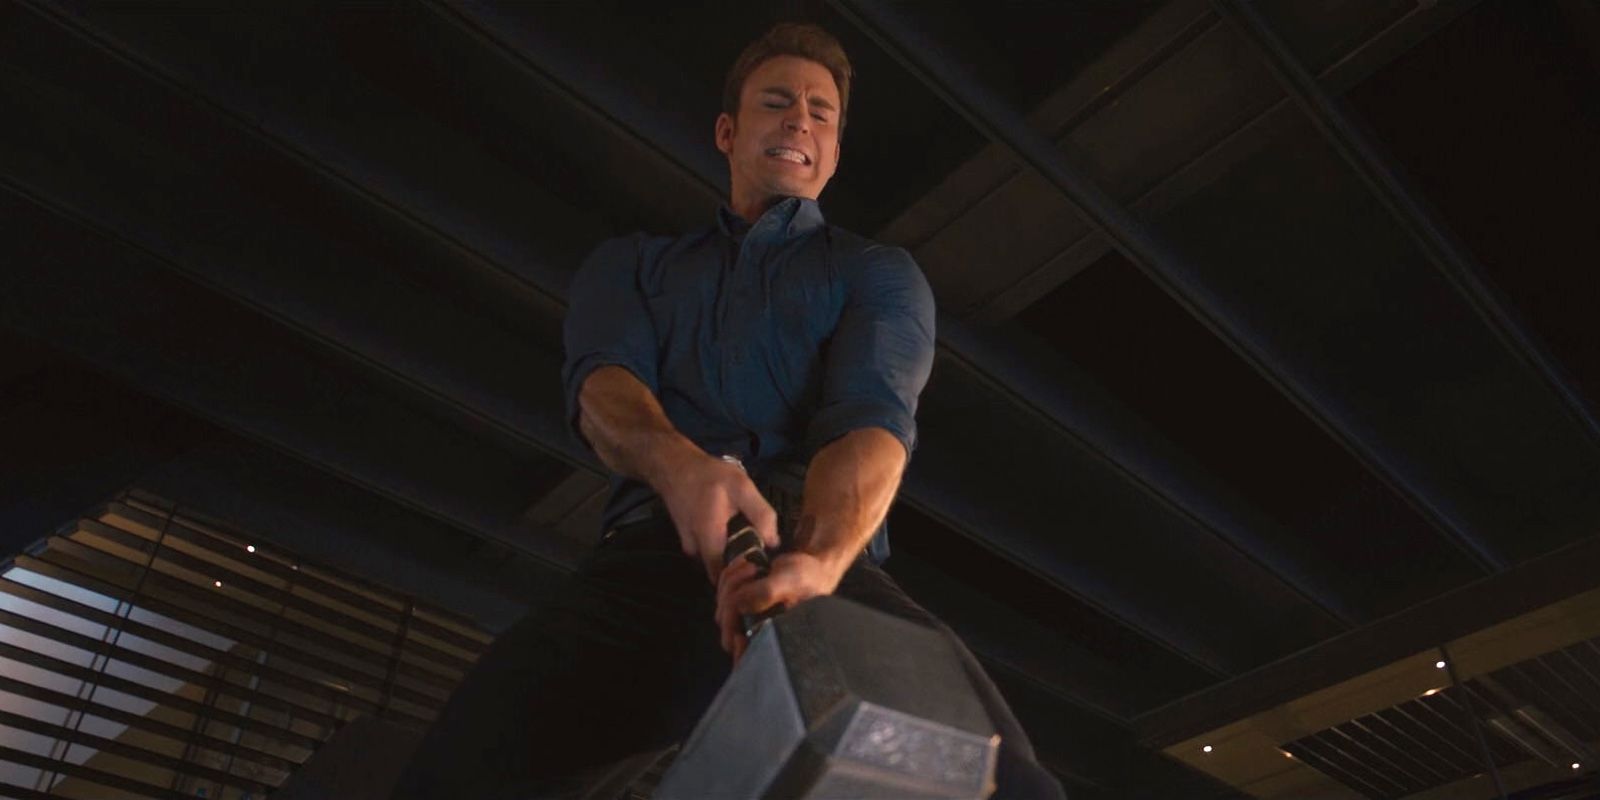 Captain America tries to lift Thor's Hammer in Avengers Age of Ultron